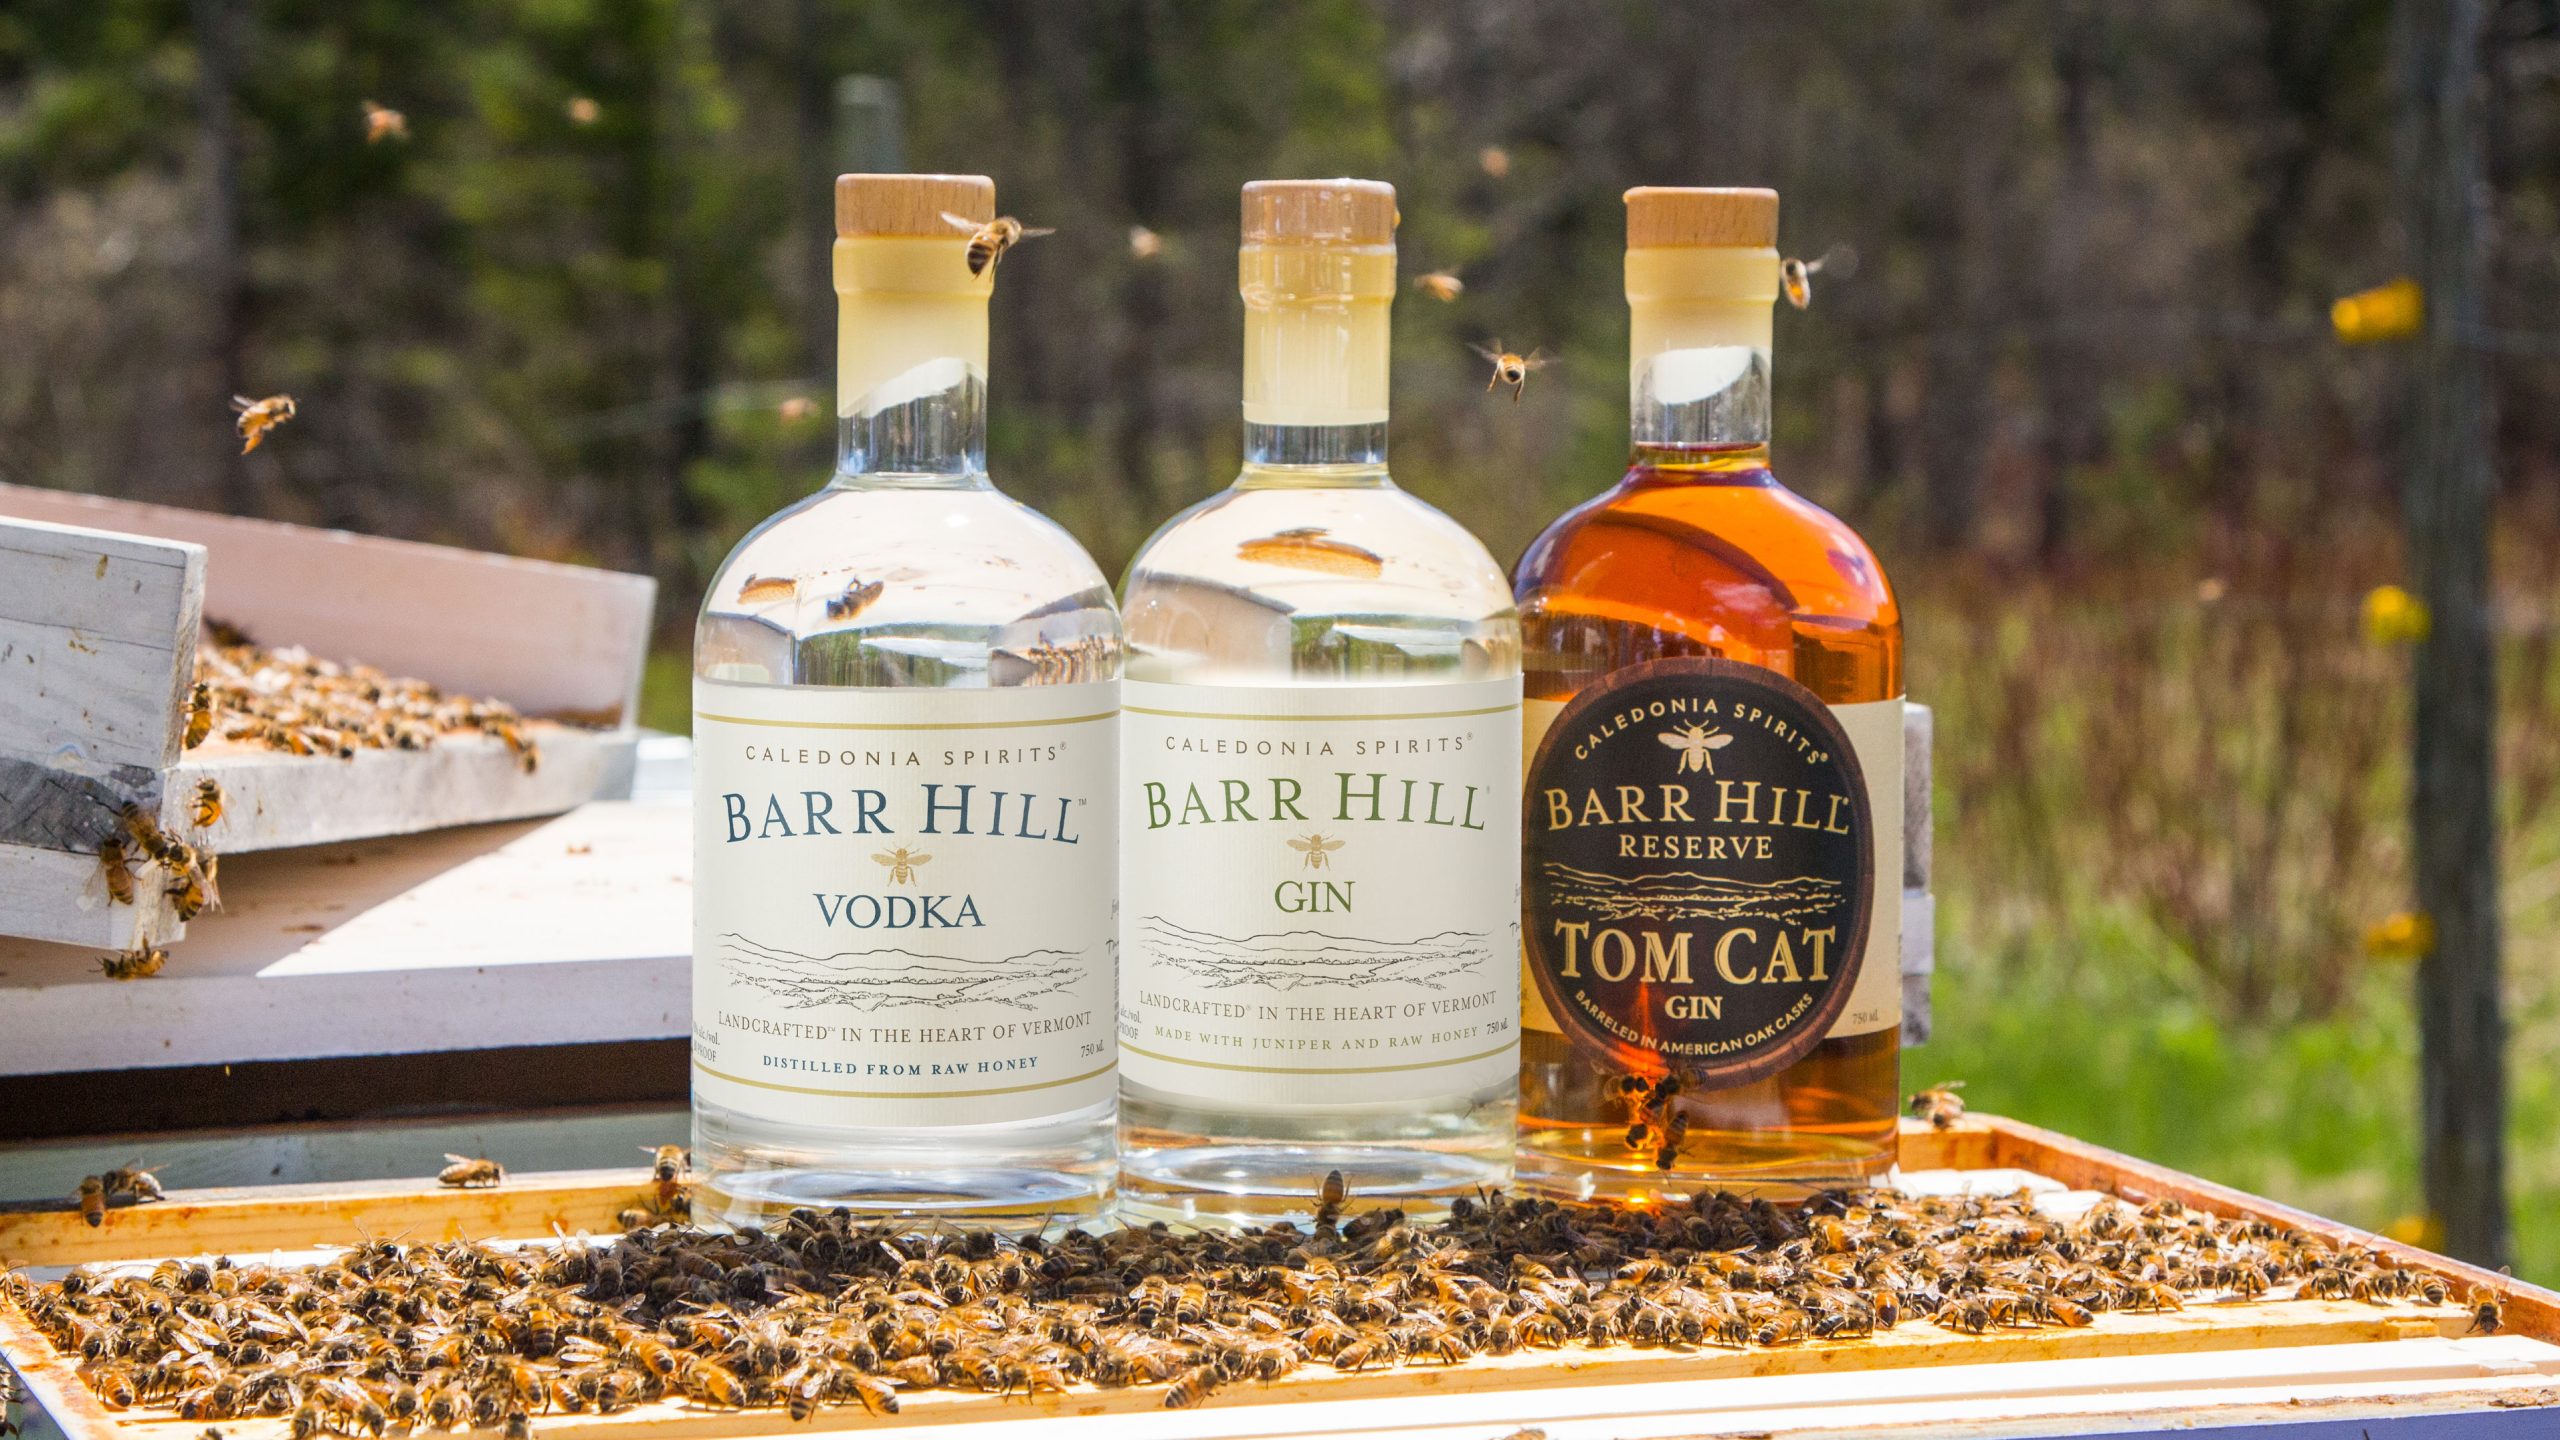 Barr Hill Vodka, Gin, and Tom Cat Gin on a bee's nest